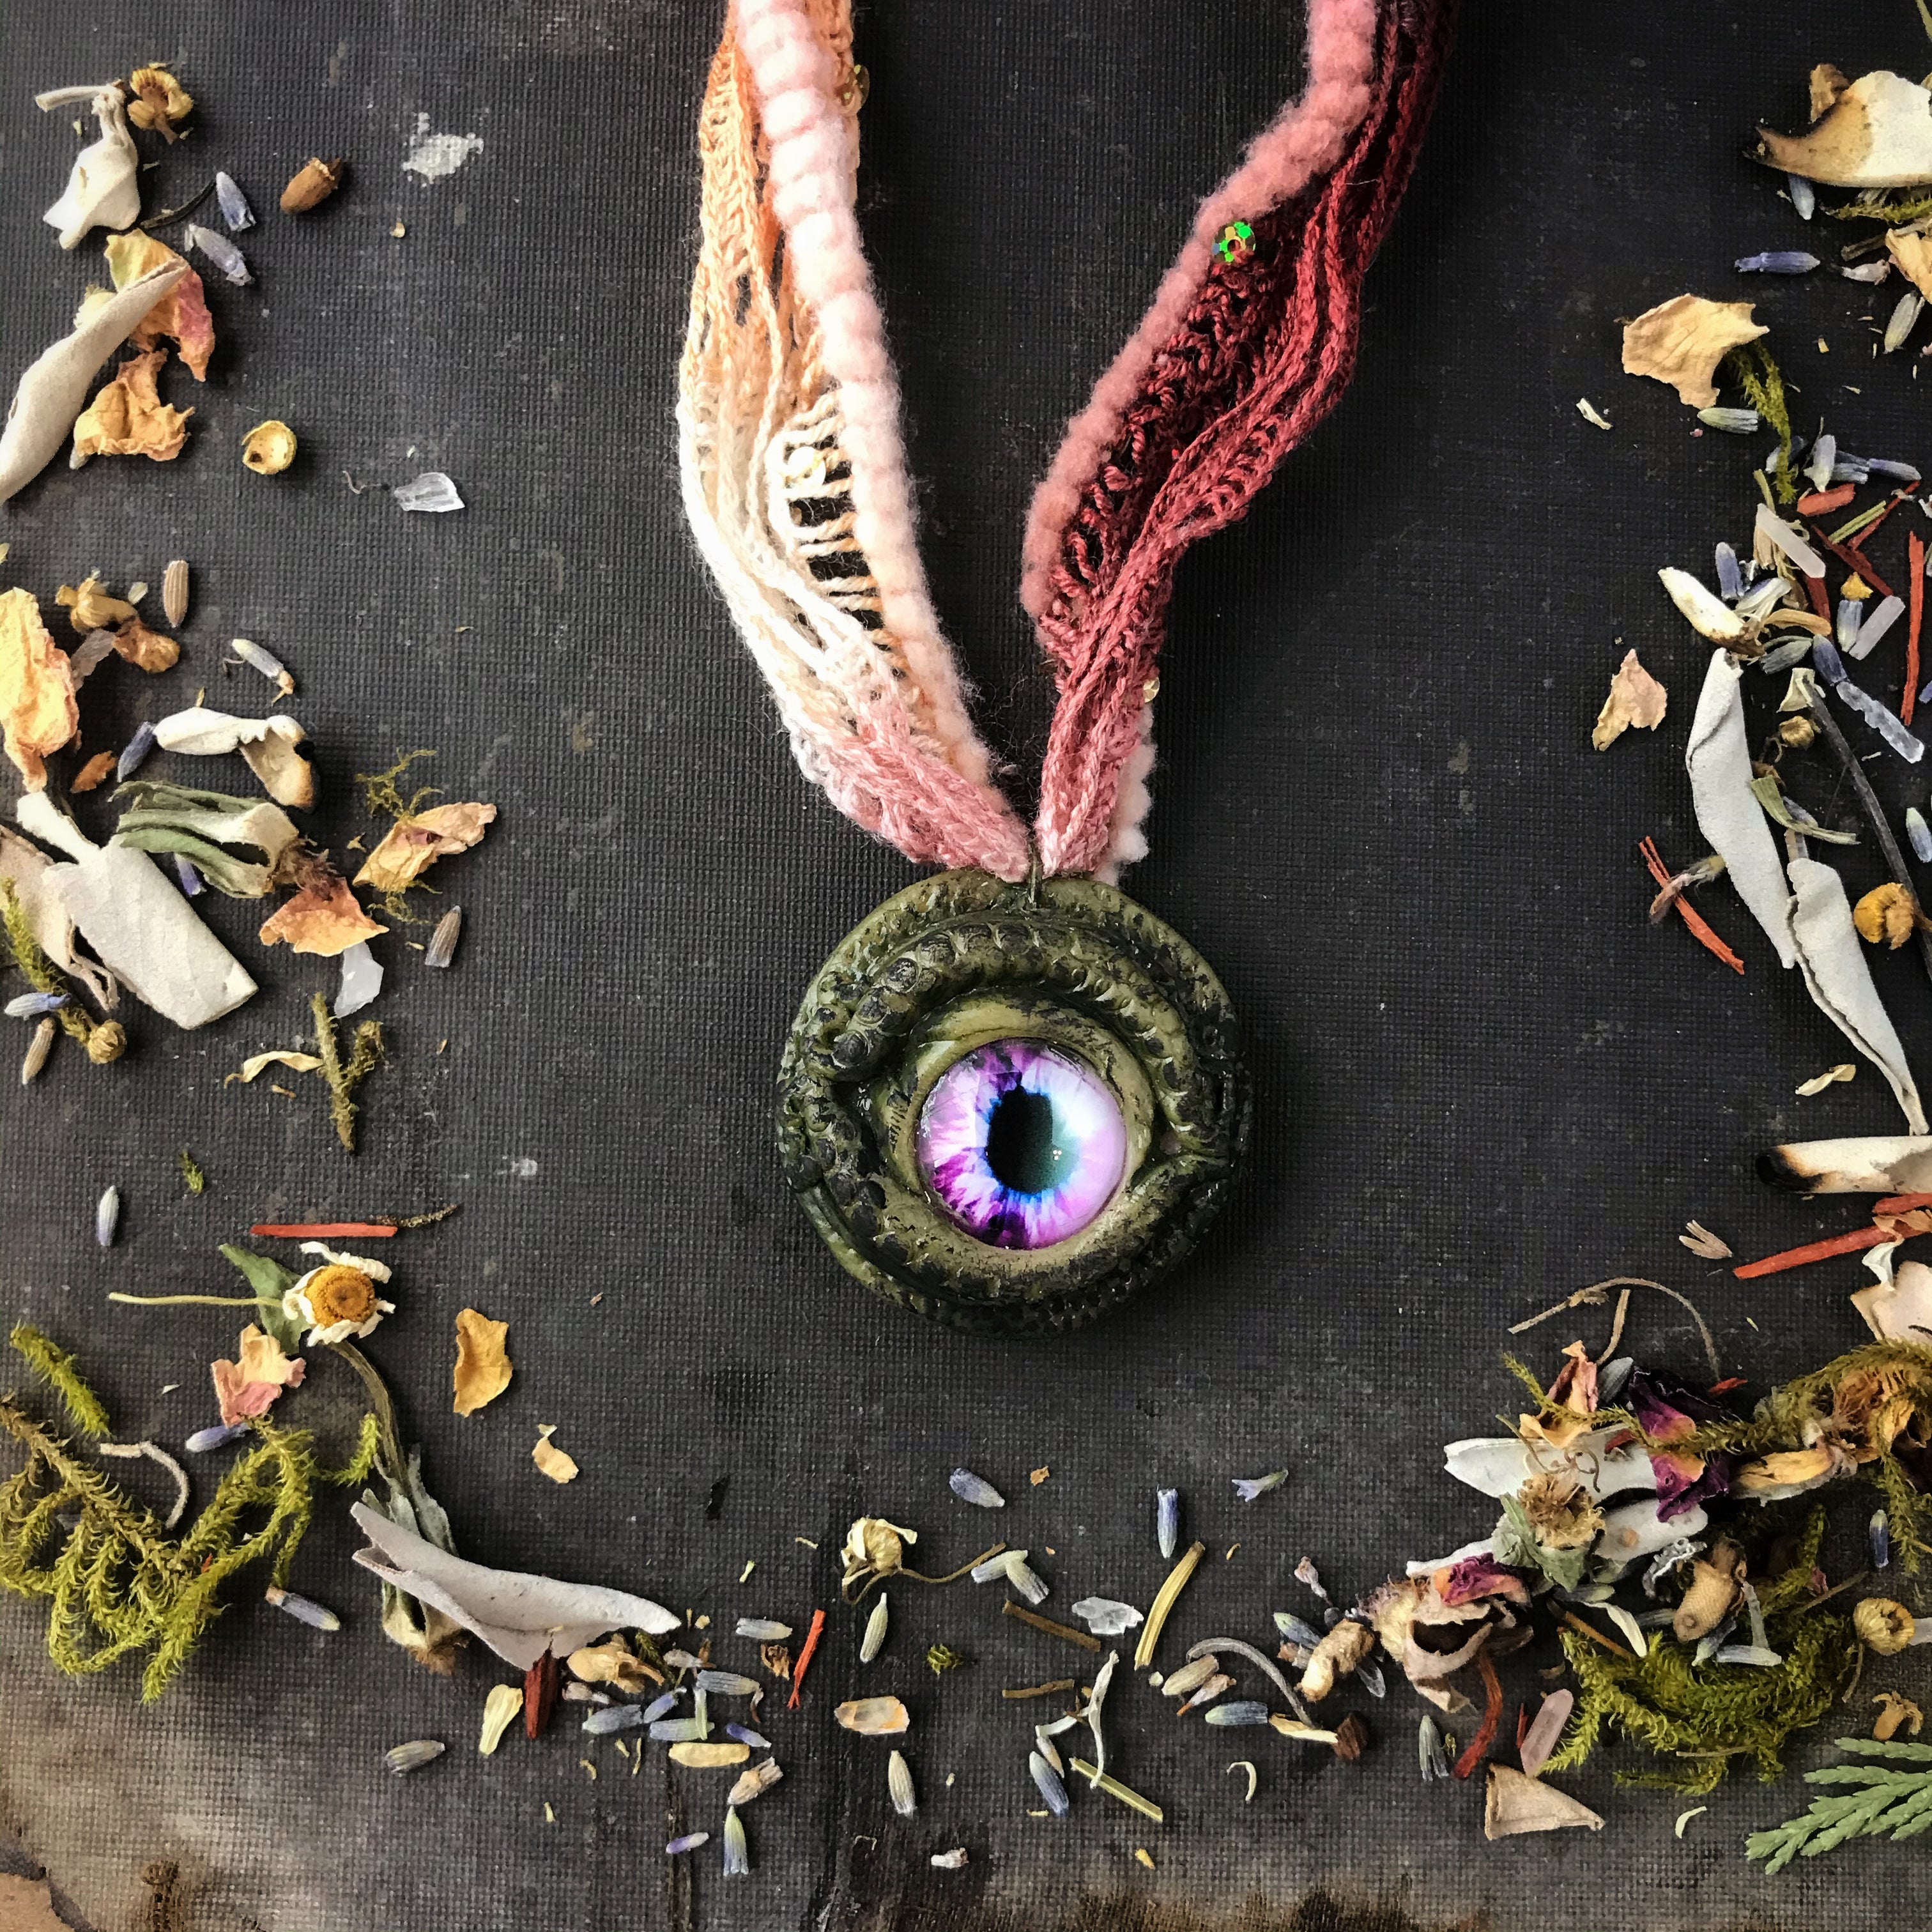 Mystical Dragon Eye Necklace for Protection, Courage and Strength